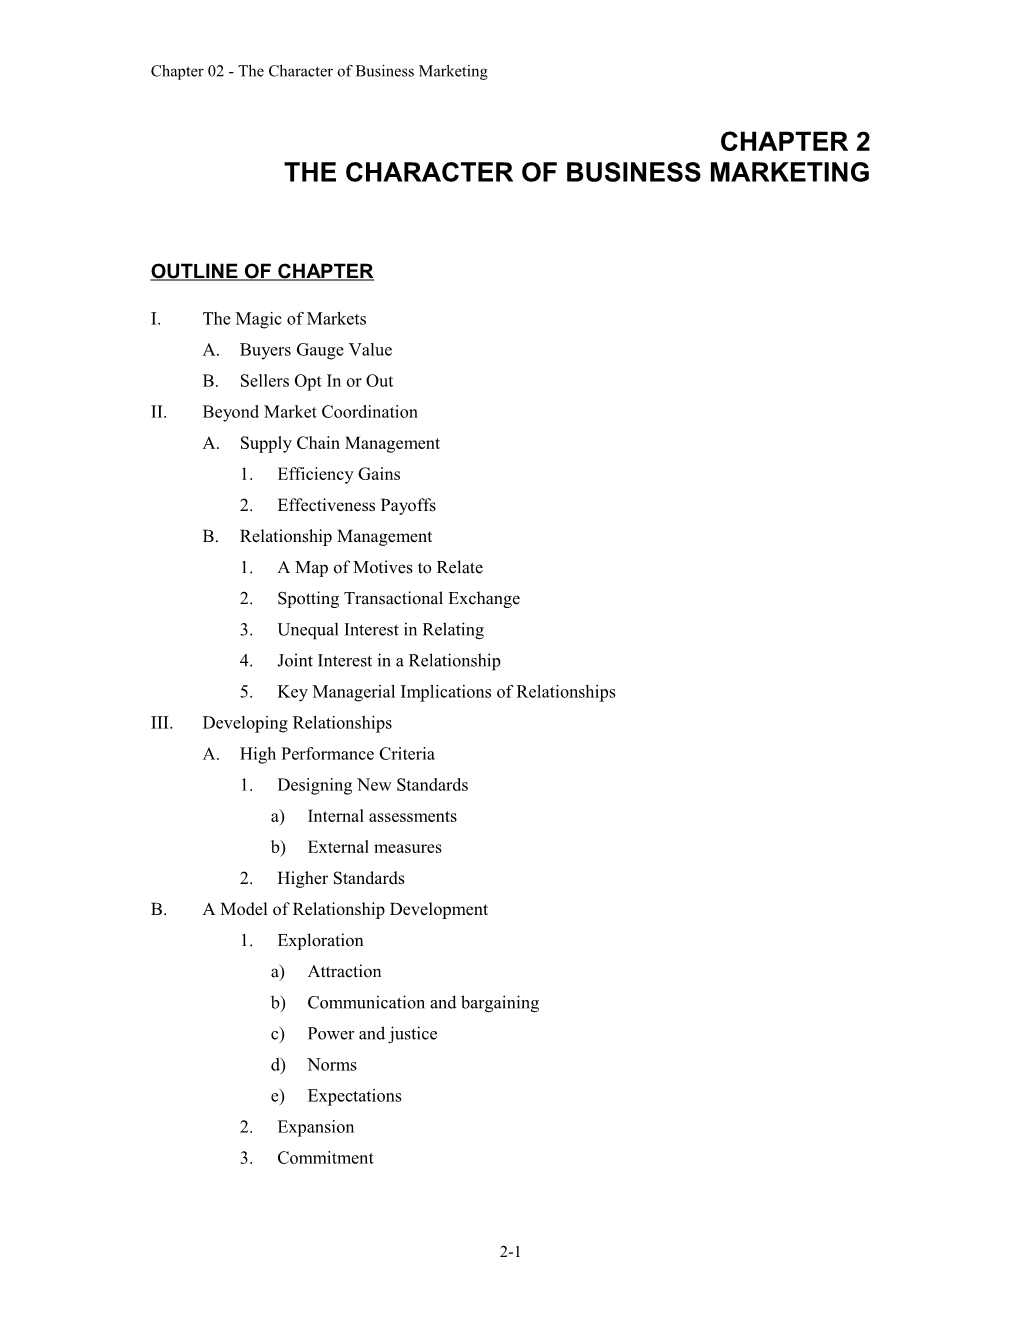 Chapter 02 - the Character of Business Marketing